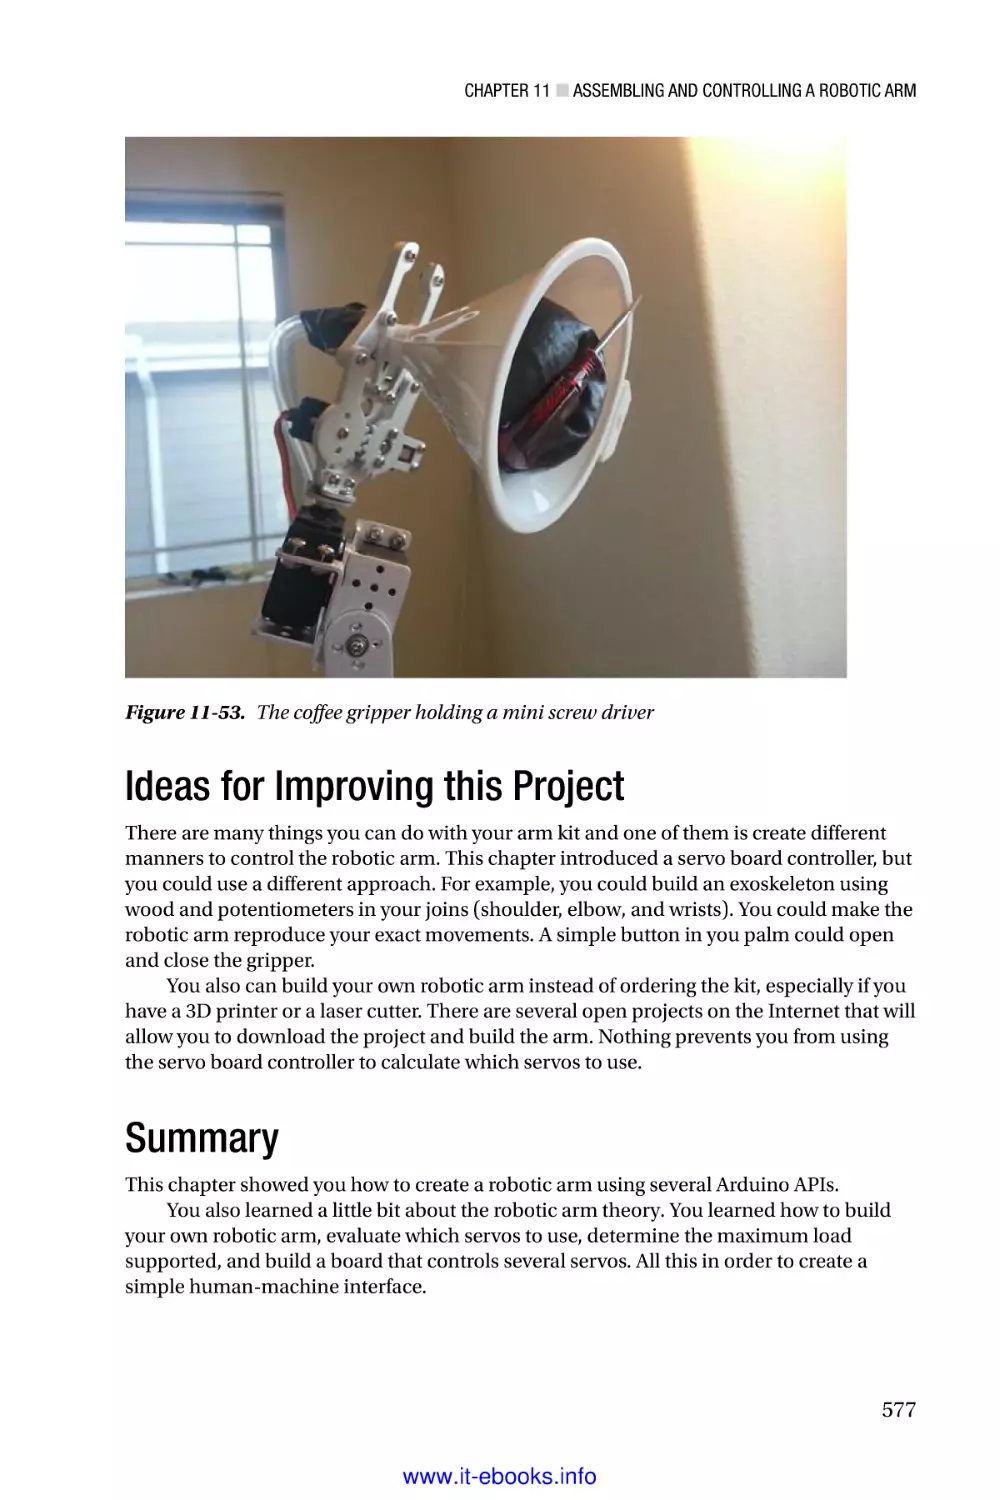 Ideas for Improving this Project
Summary